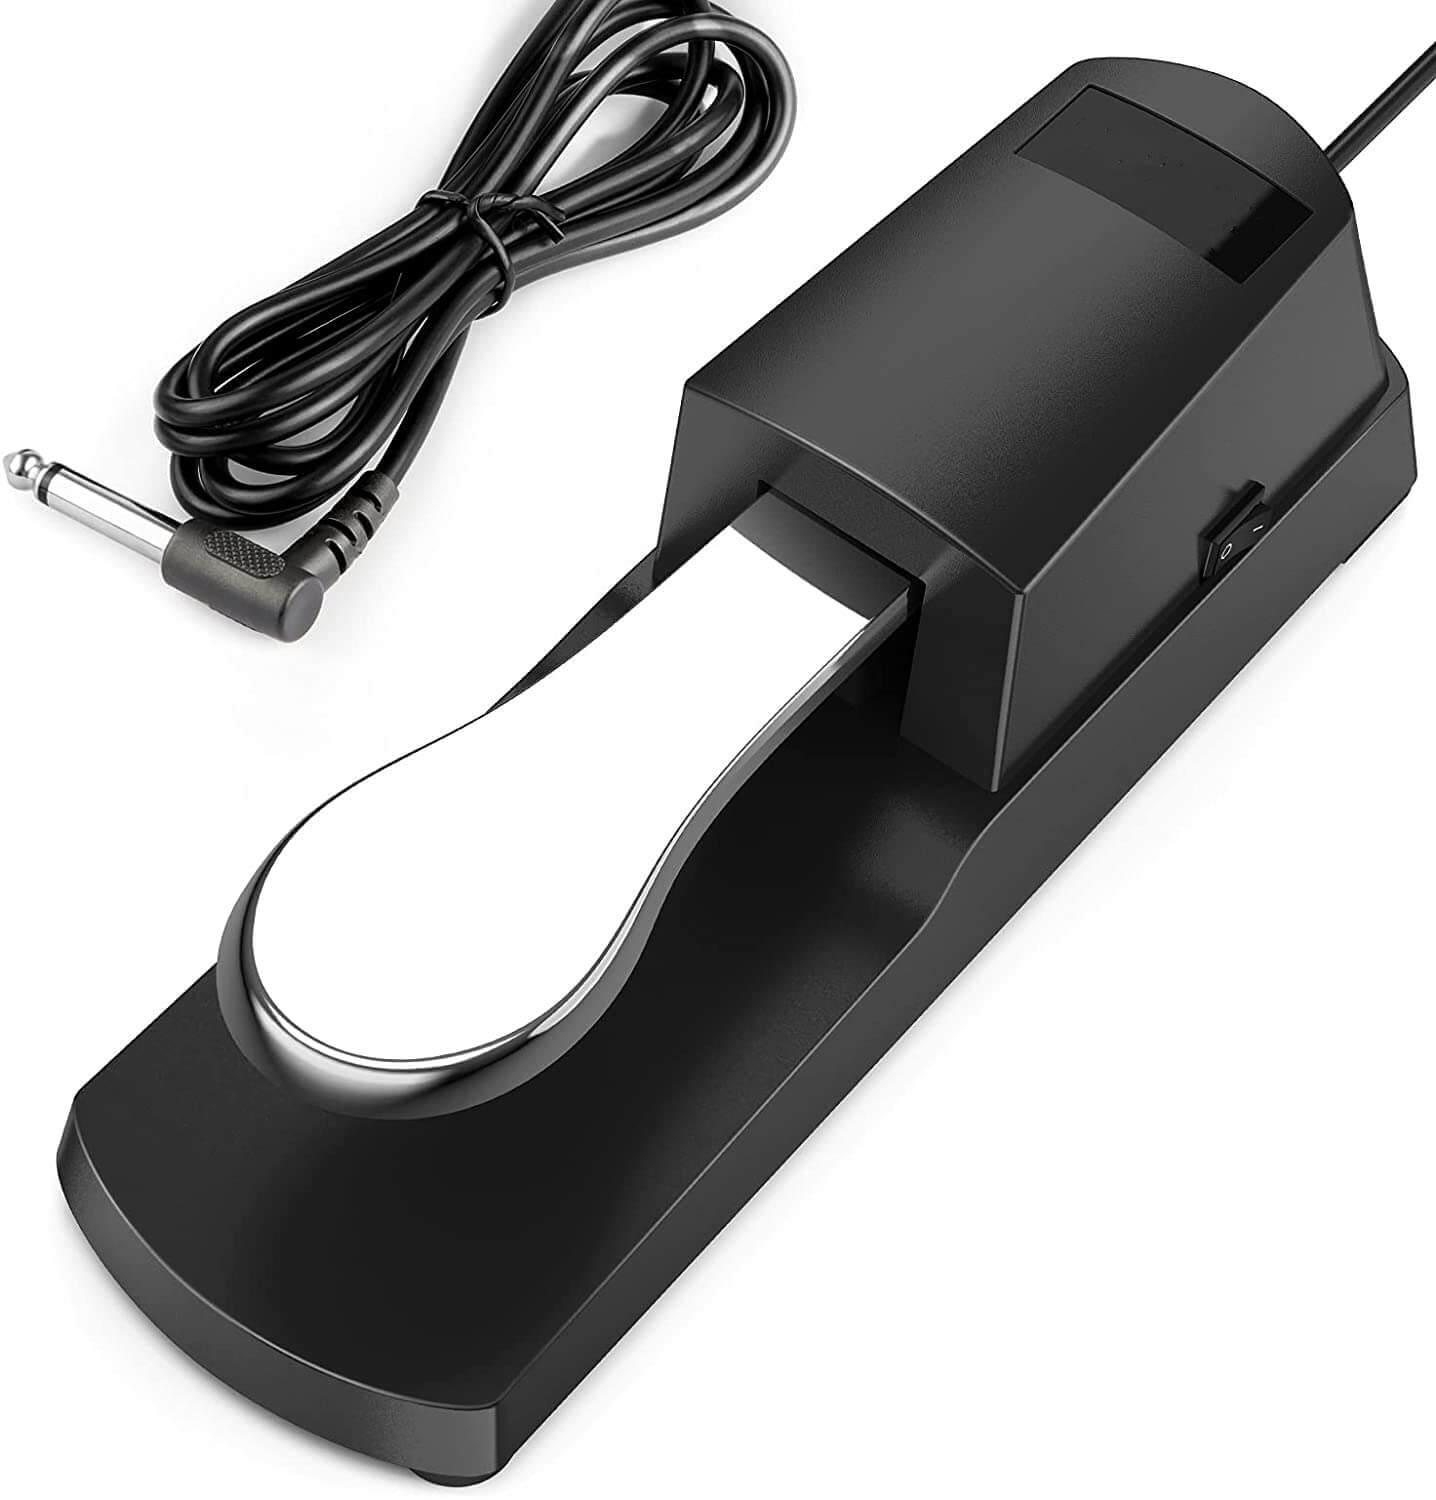 15 cm piano keyboard sustain pedal damper sustain foot pedal - GADGET WAGON Musical Instruments